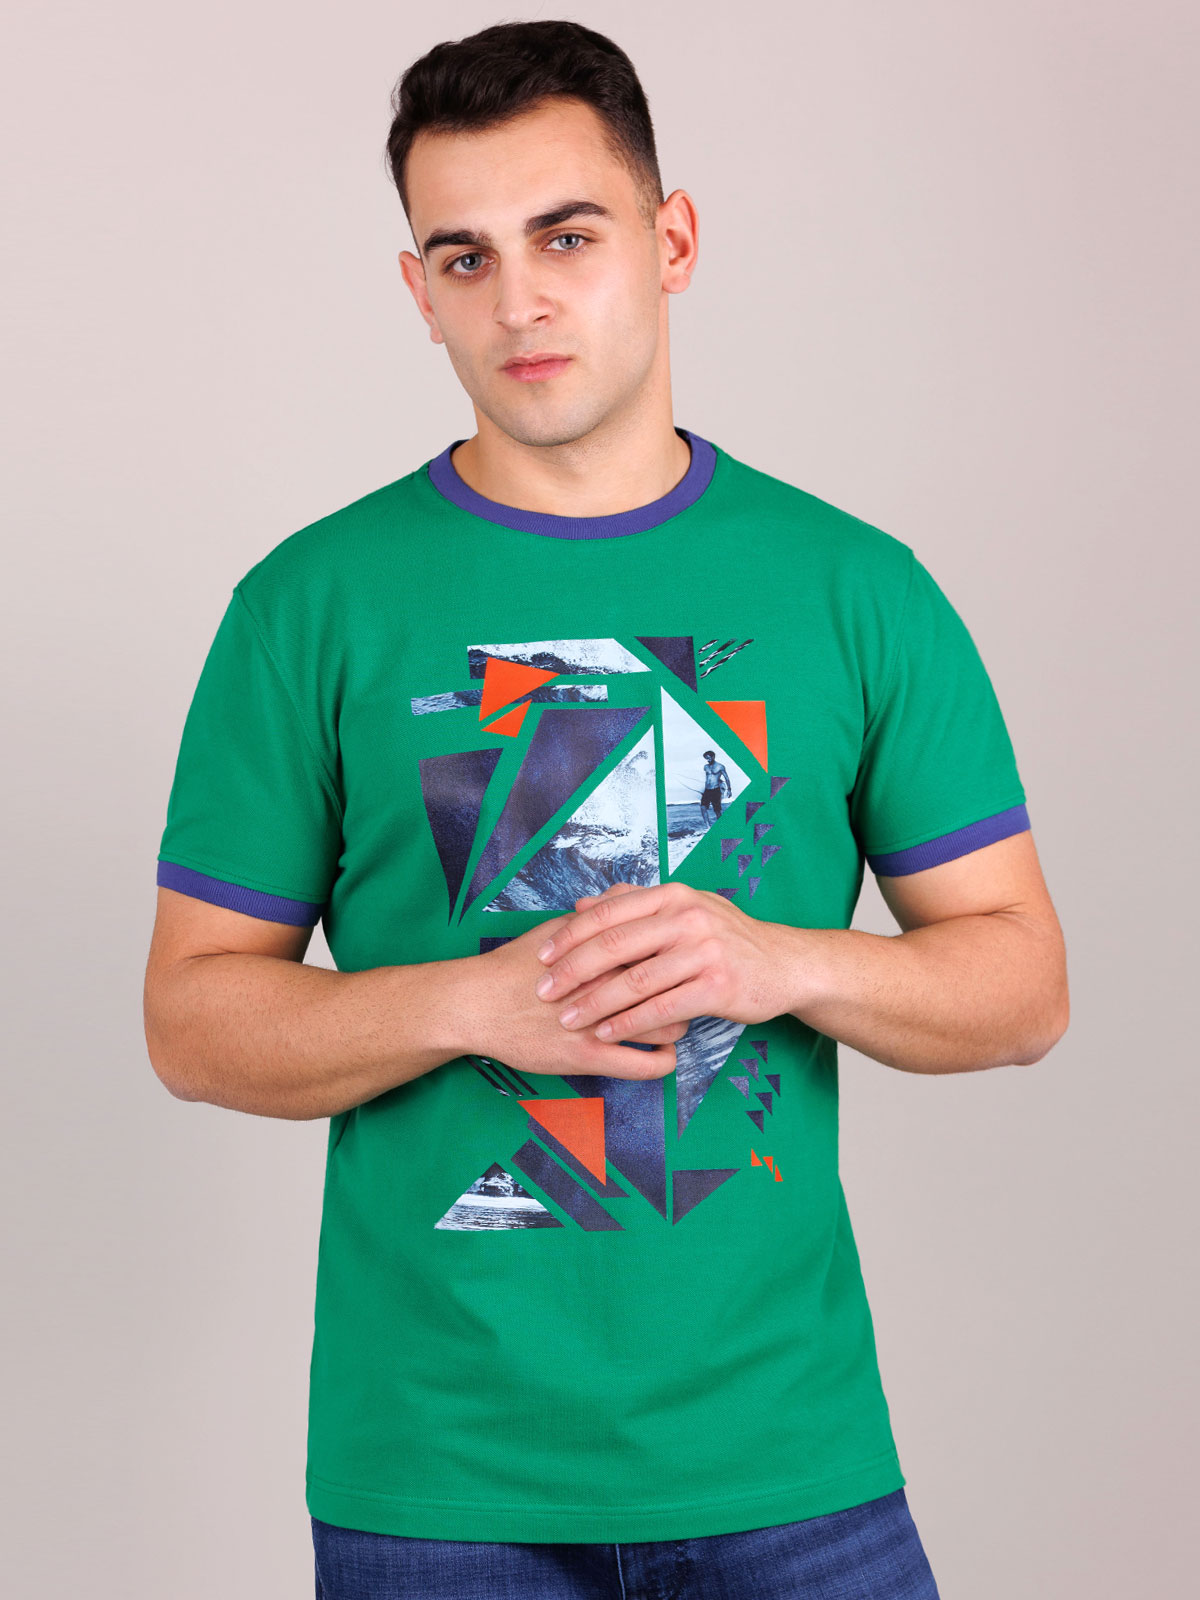 Tshirt in green with a summer design - 95367 € 23.62 img3